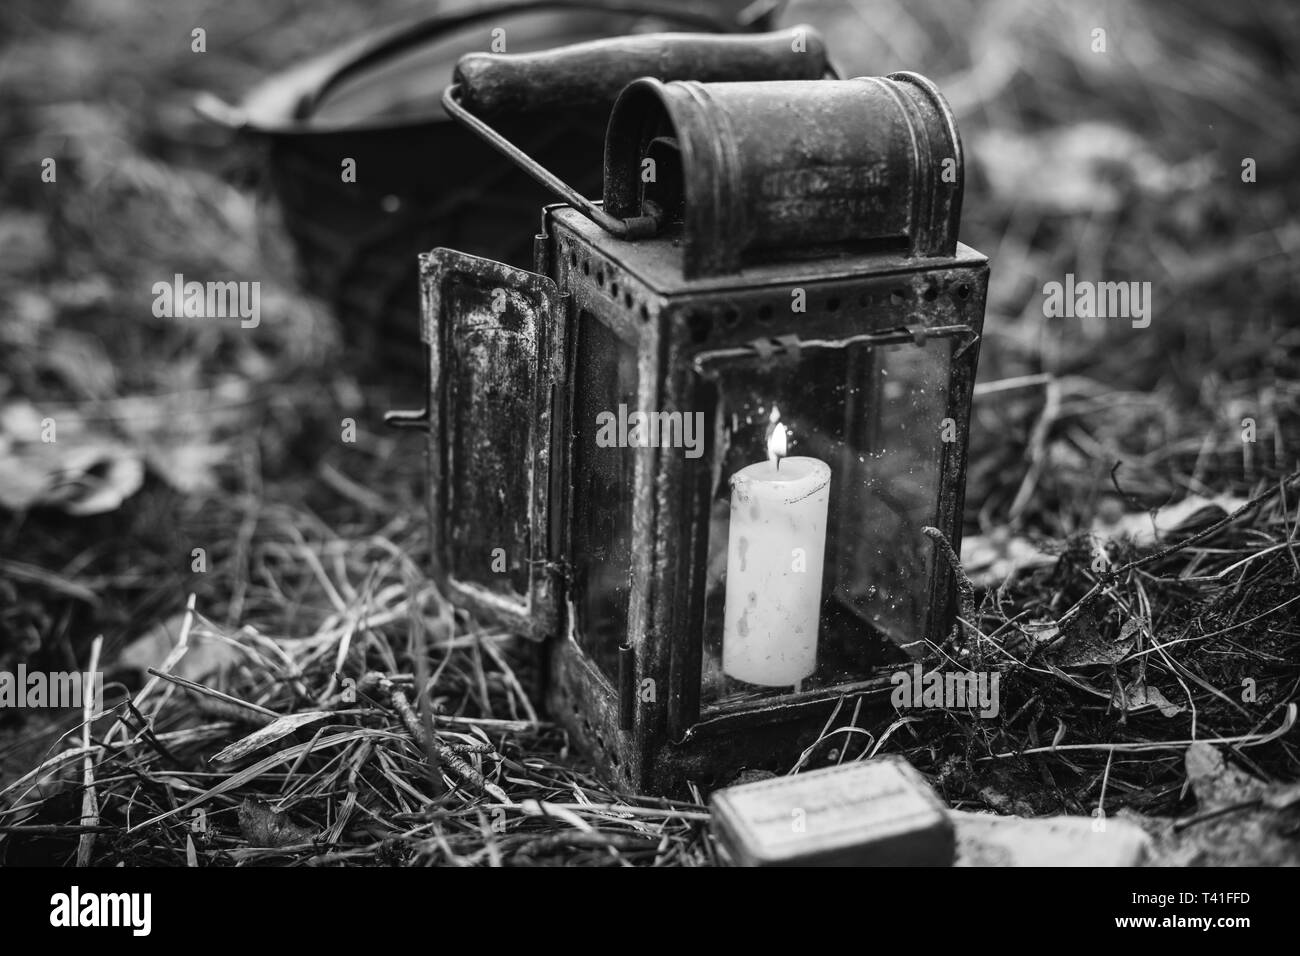 Old German Wehrmacht Times Of World War II Vintage Lantern With Burning Candle On Forest Ground. Photo In Black And White Colors. WWII WW2 Times. Stock Photo